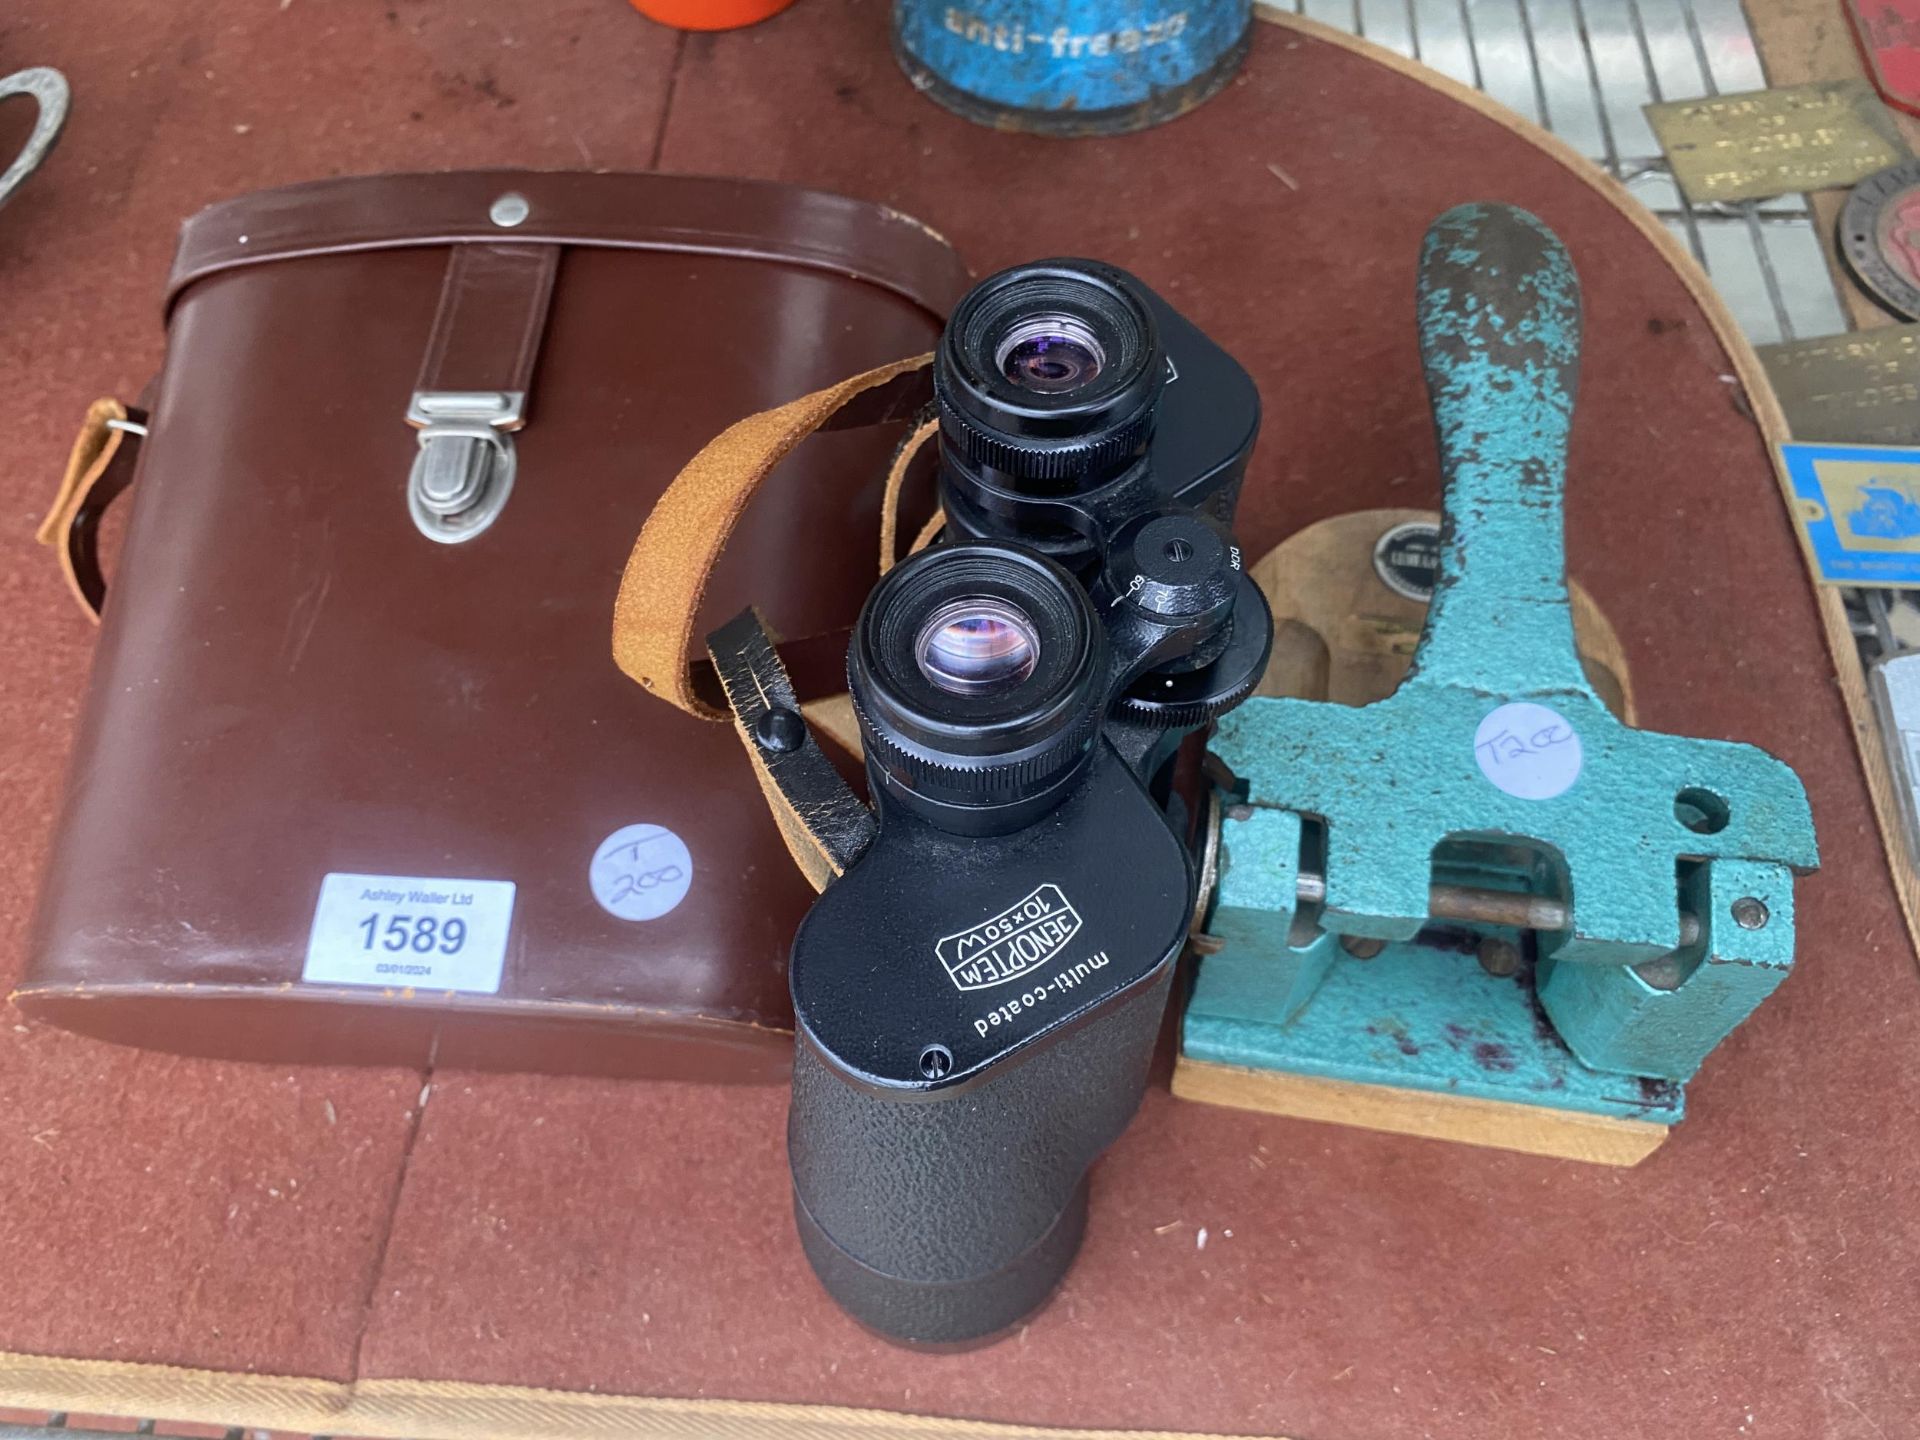 A VINTAGE PAIR OF BINOCULARS WITH CARRY CASE AND A VINTAGE STAMP